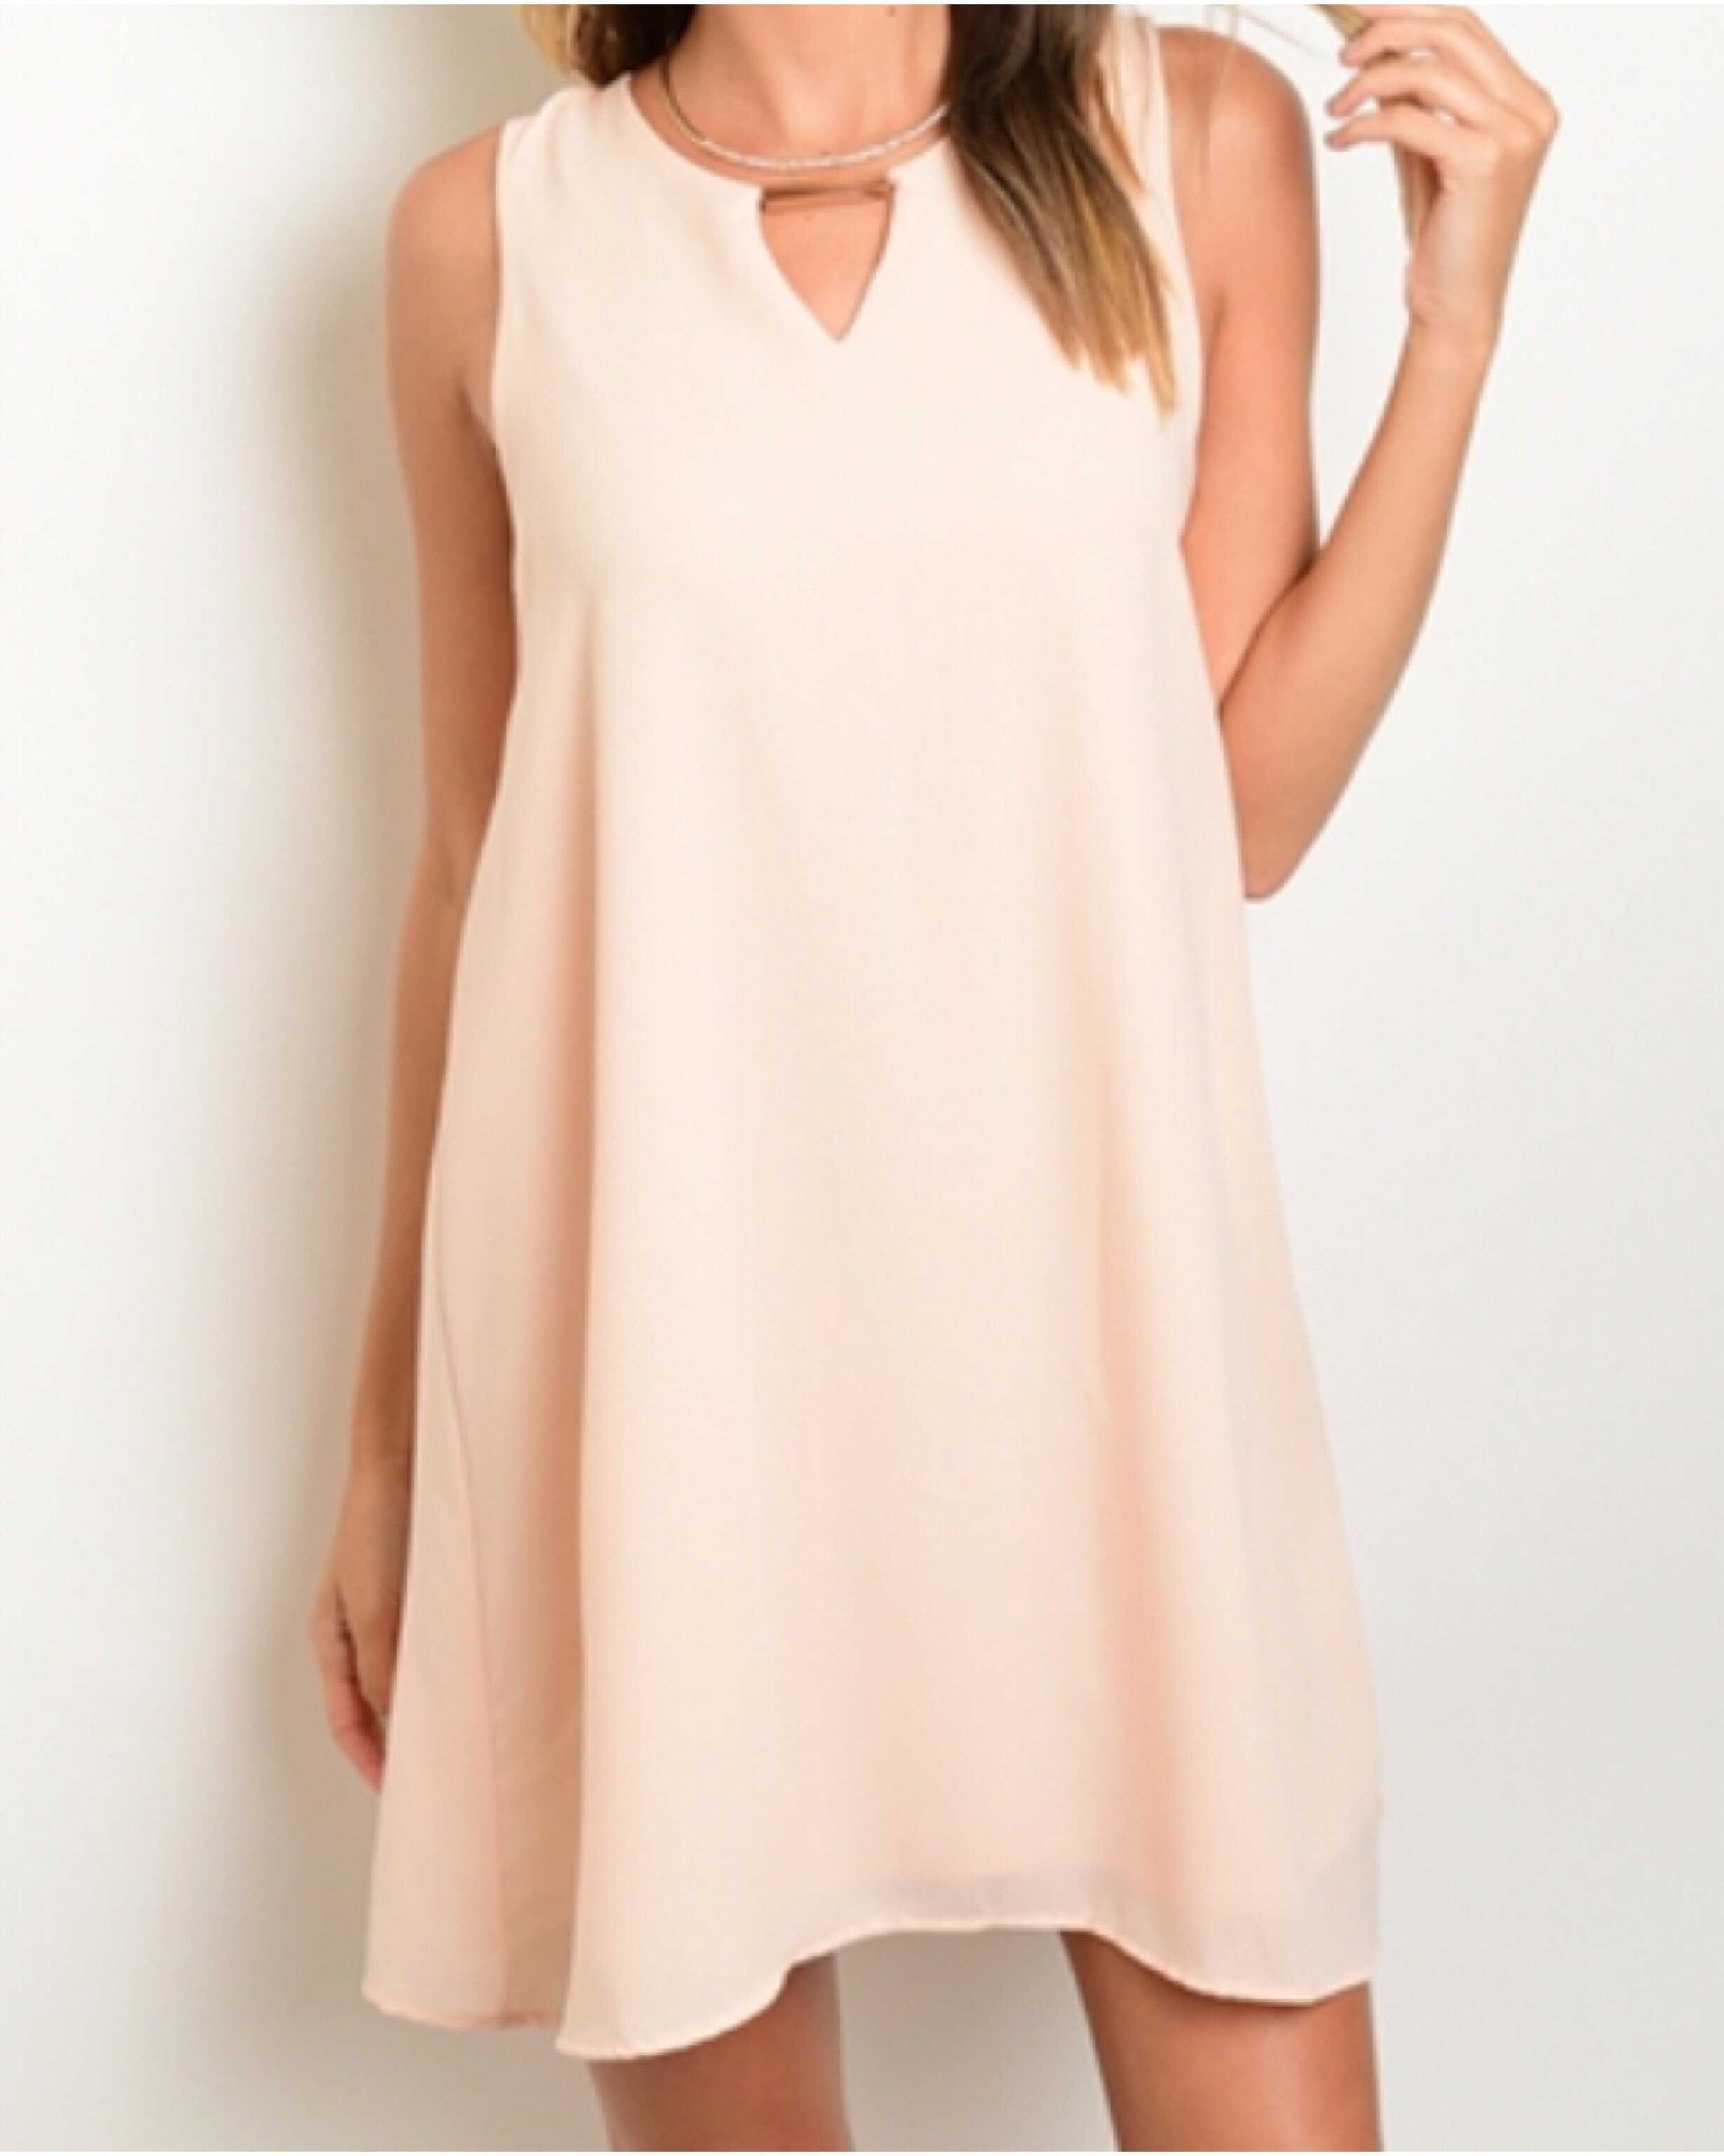 Dreamsicle Peach Solid Key-hole Shift Dress - TheBrownEyedGirl Boutique